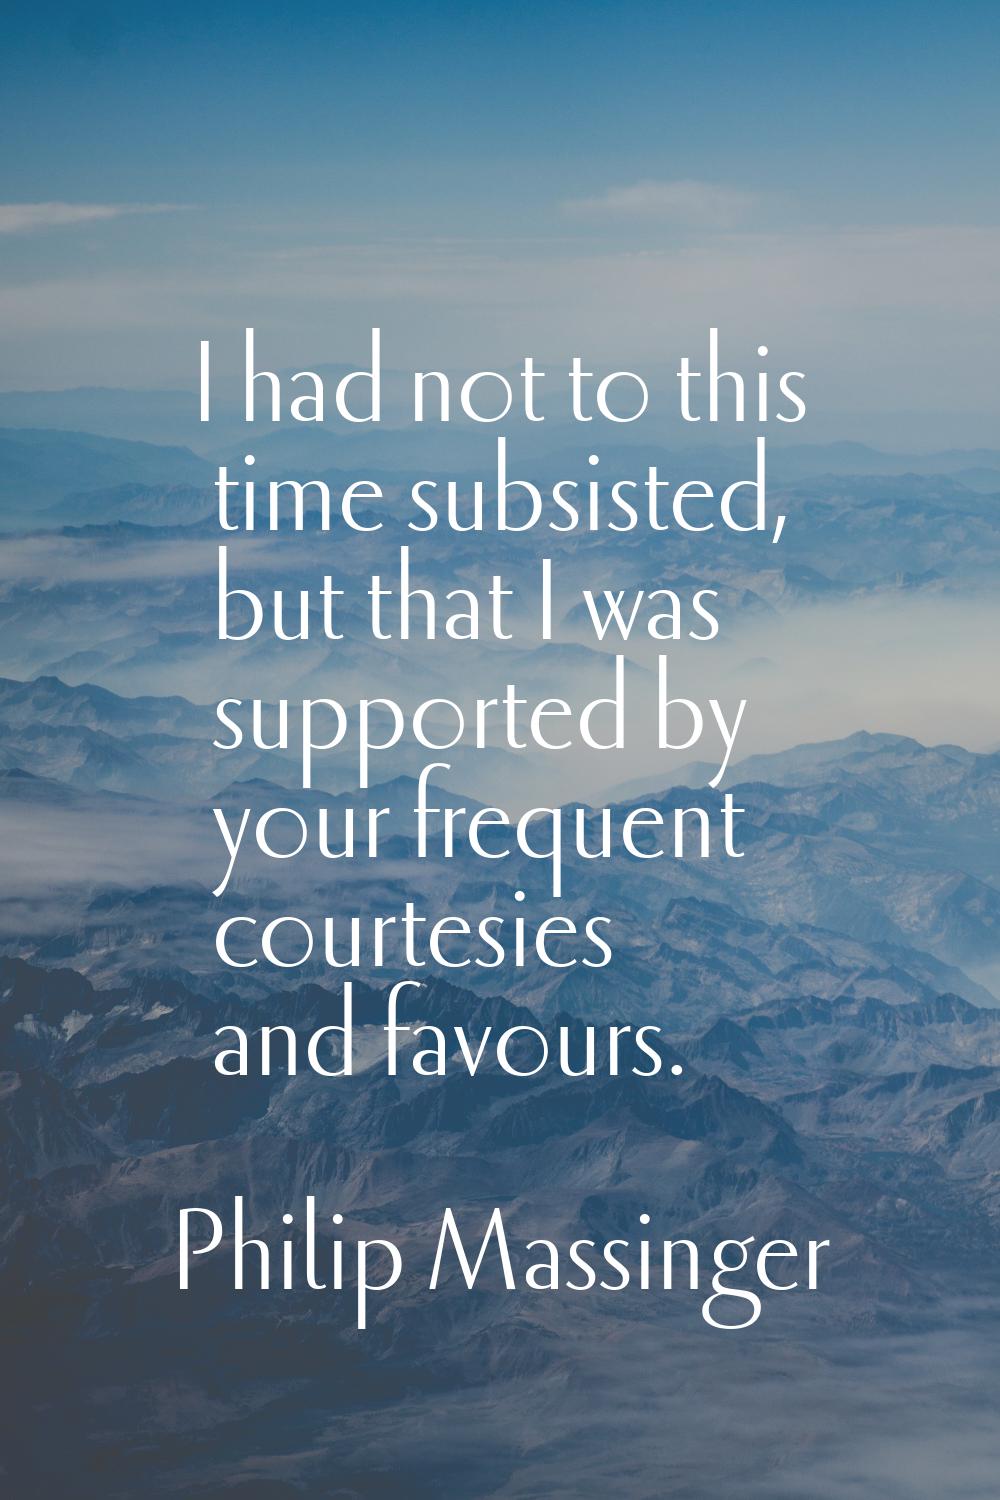 I had not to this time subsisted, but that I was supported by your frequent courtesies and favours.